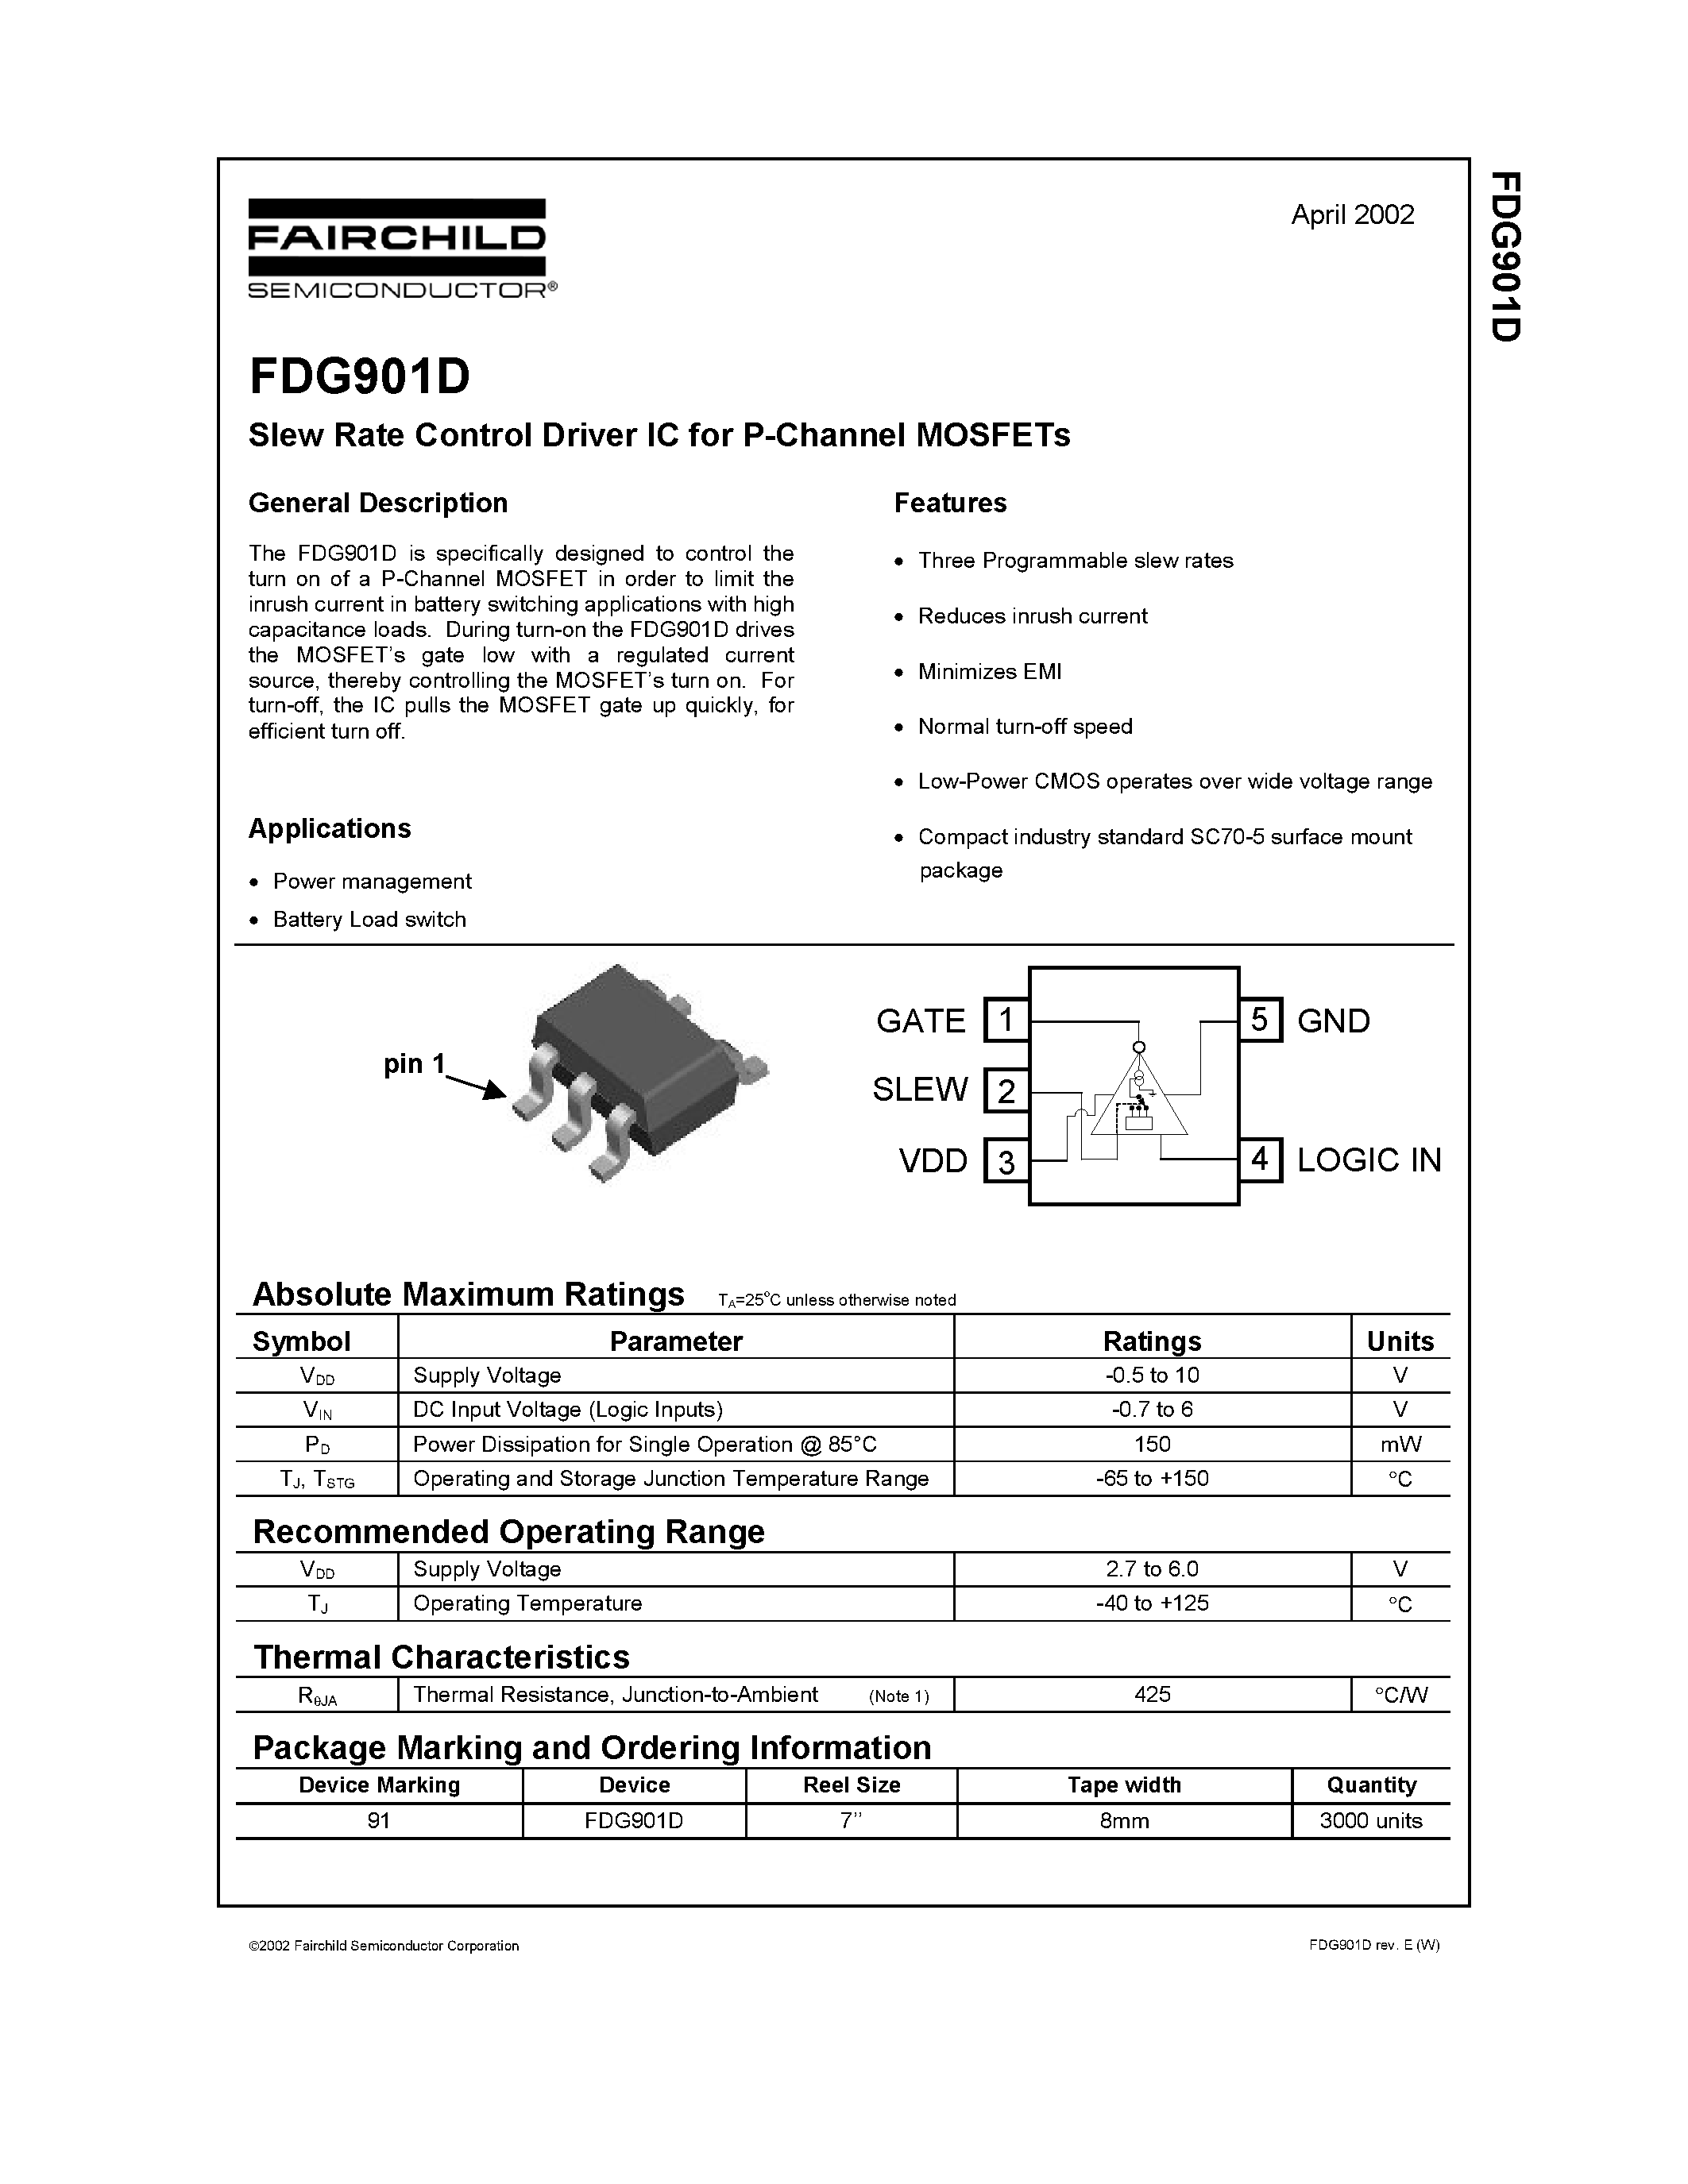 Даташит FDG901D - Slew Rate Control Driver IC for P-Channel MOSFETs страница 1